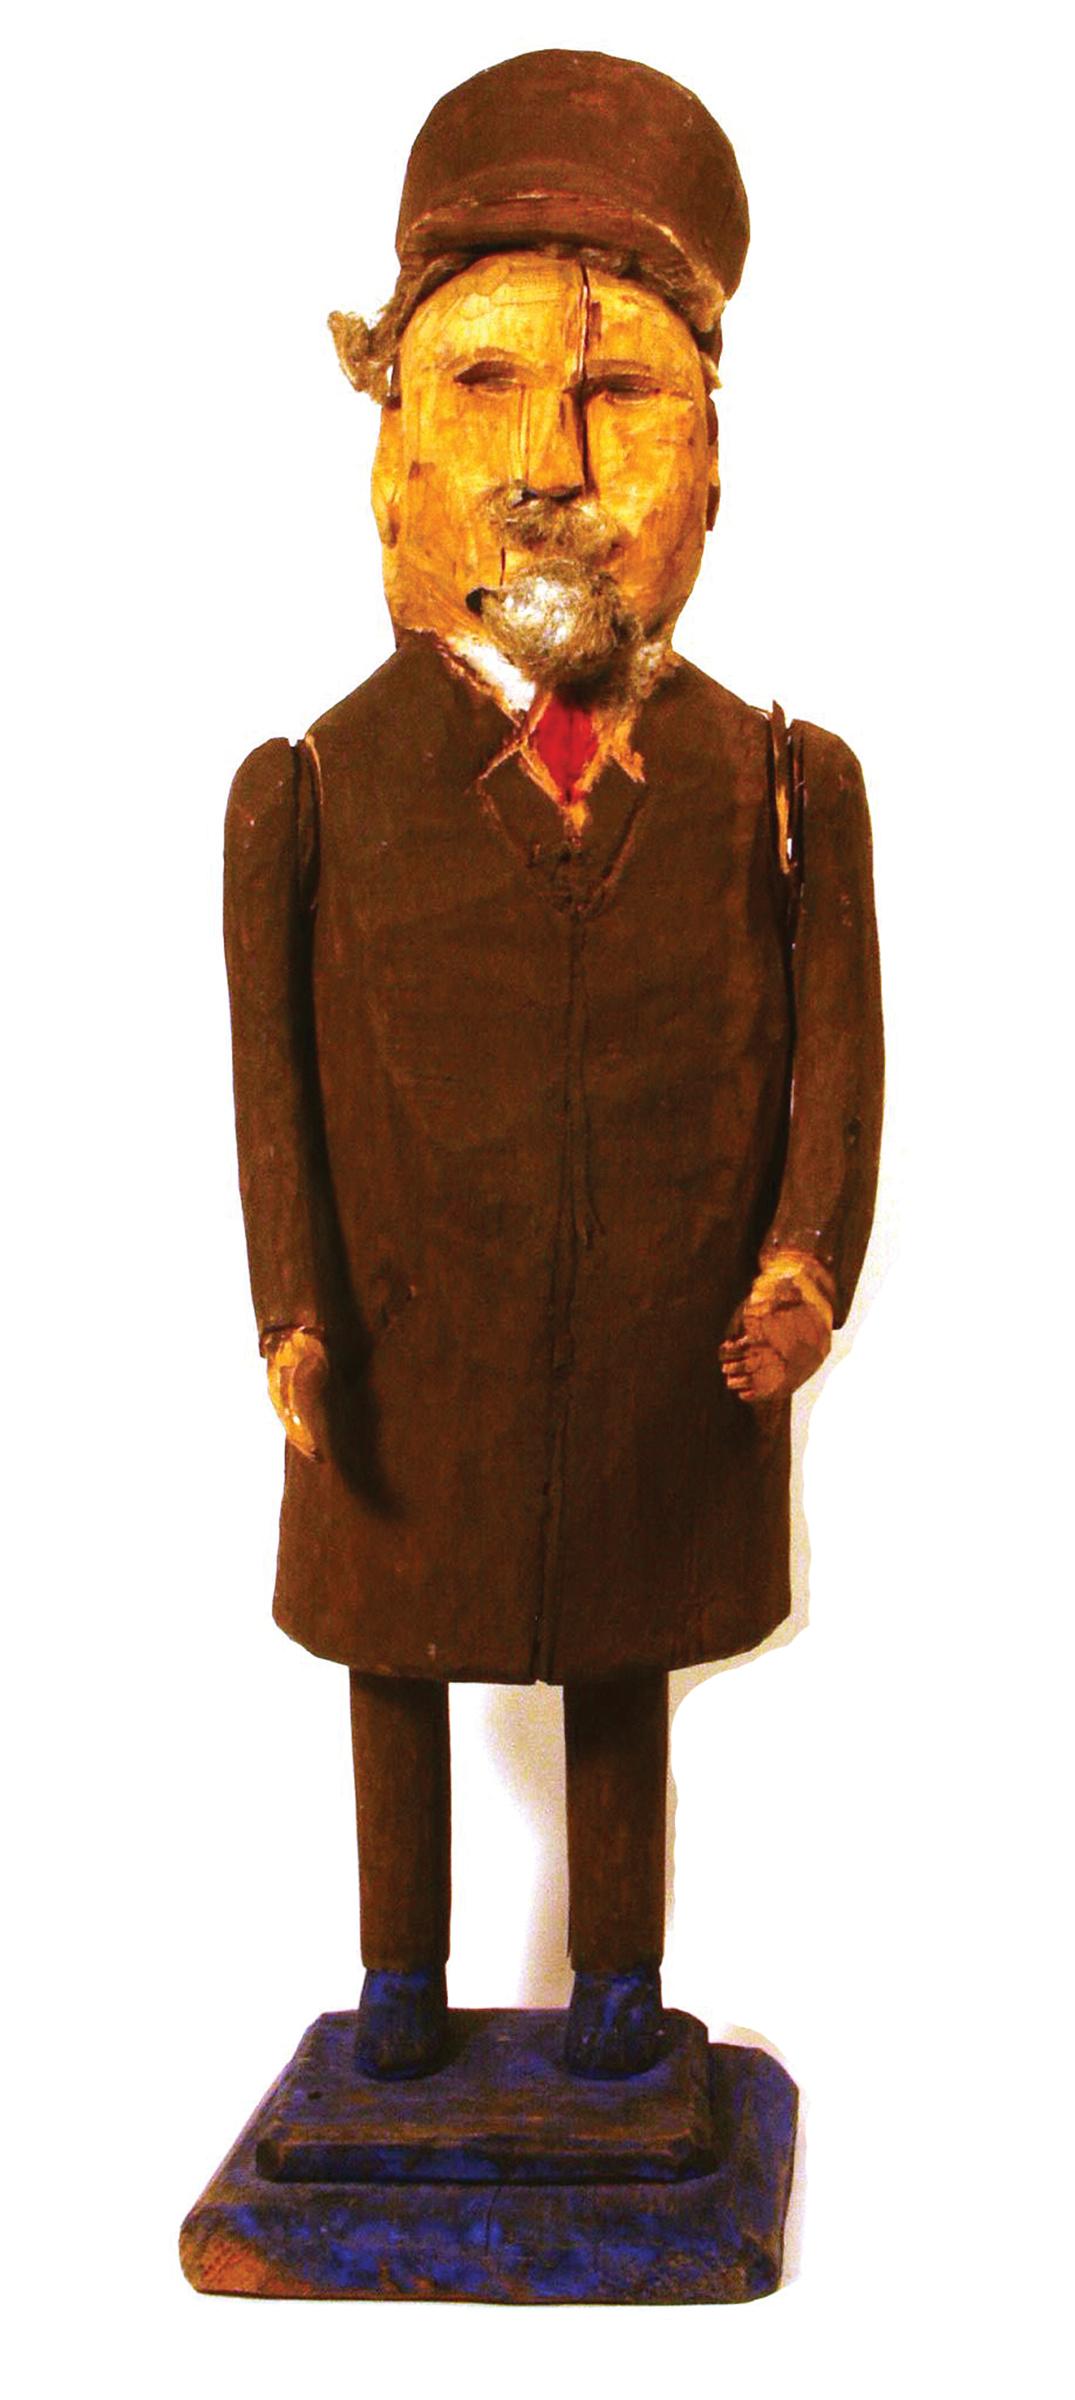 Wooden statuette of Lenin, wearing a cap and brown overcoat